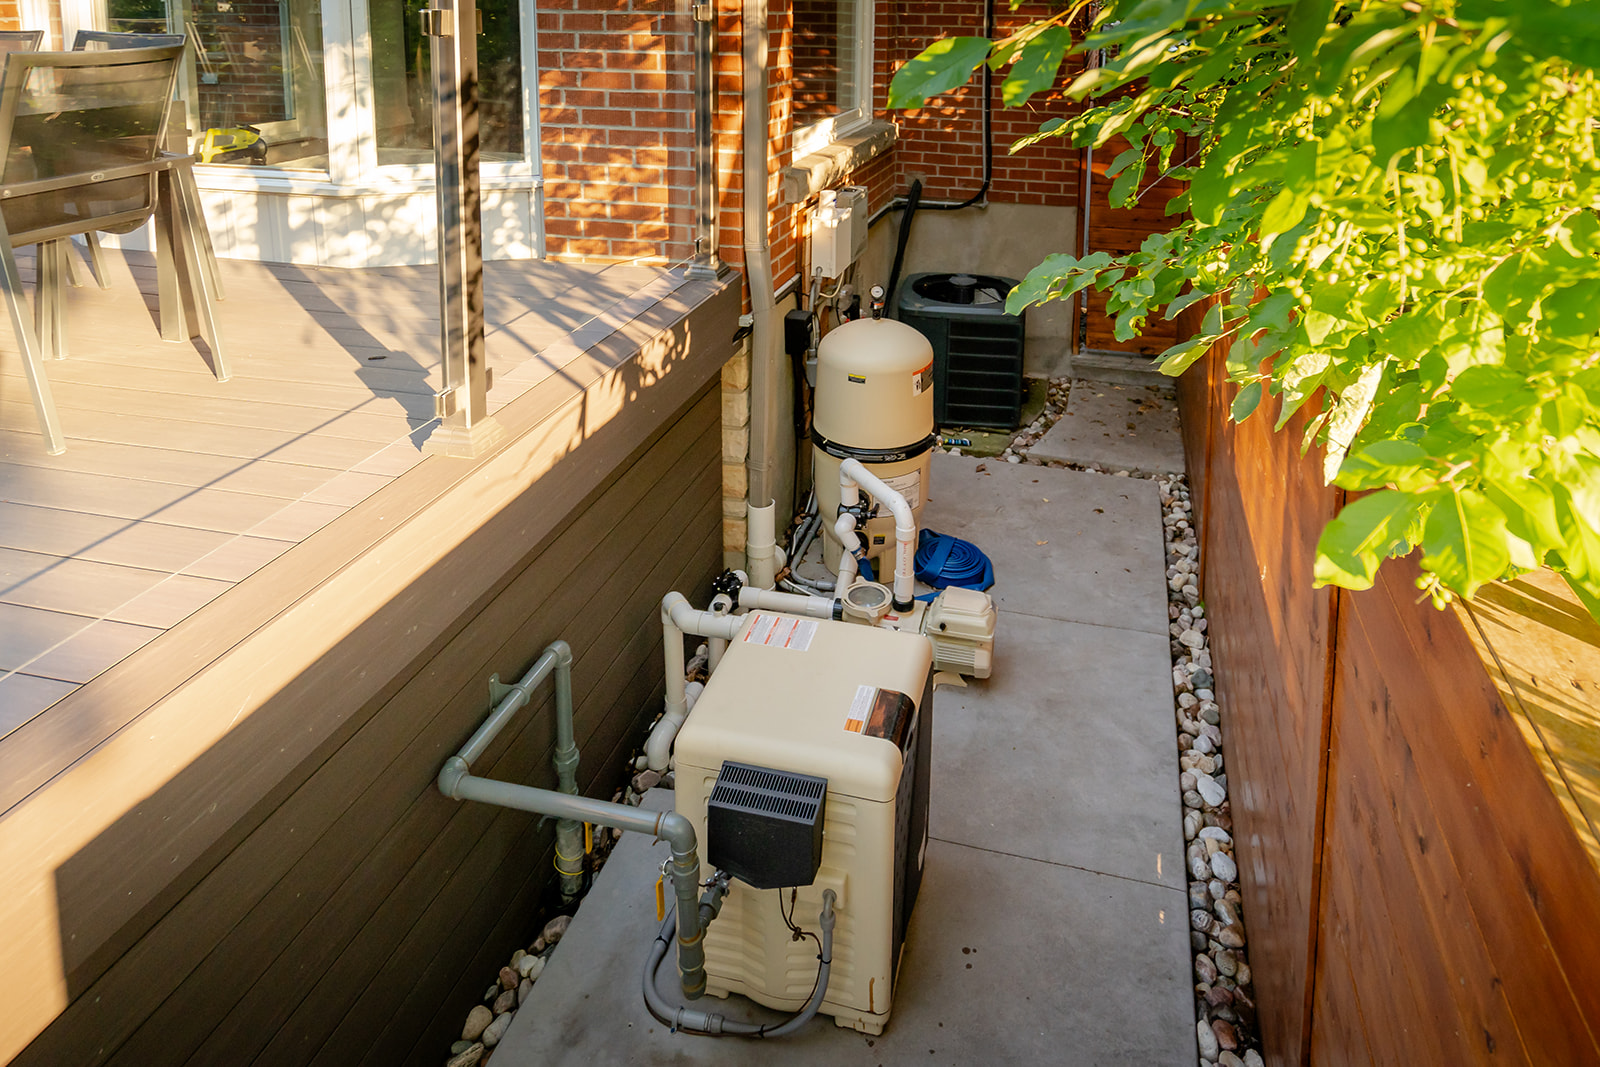 Pool pumps lined up beside a deck outside.